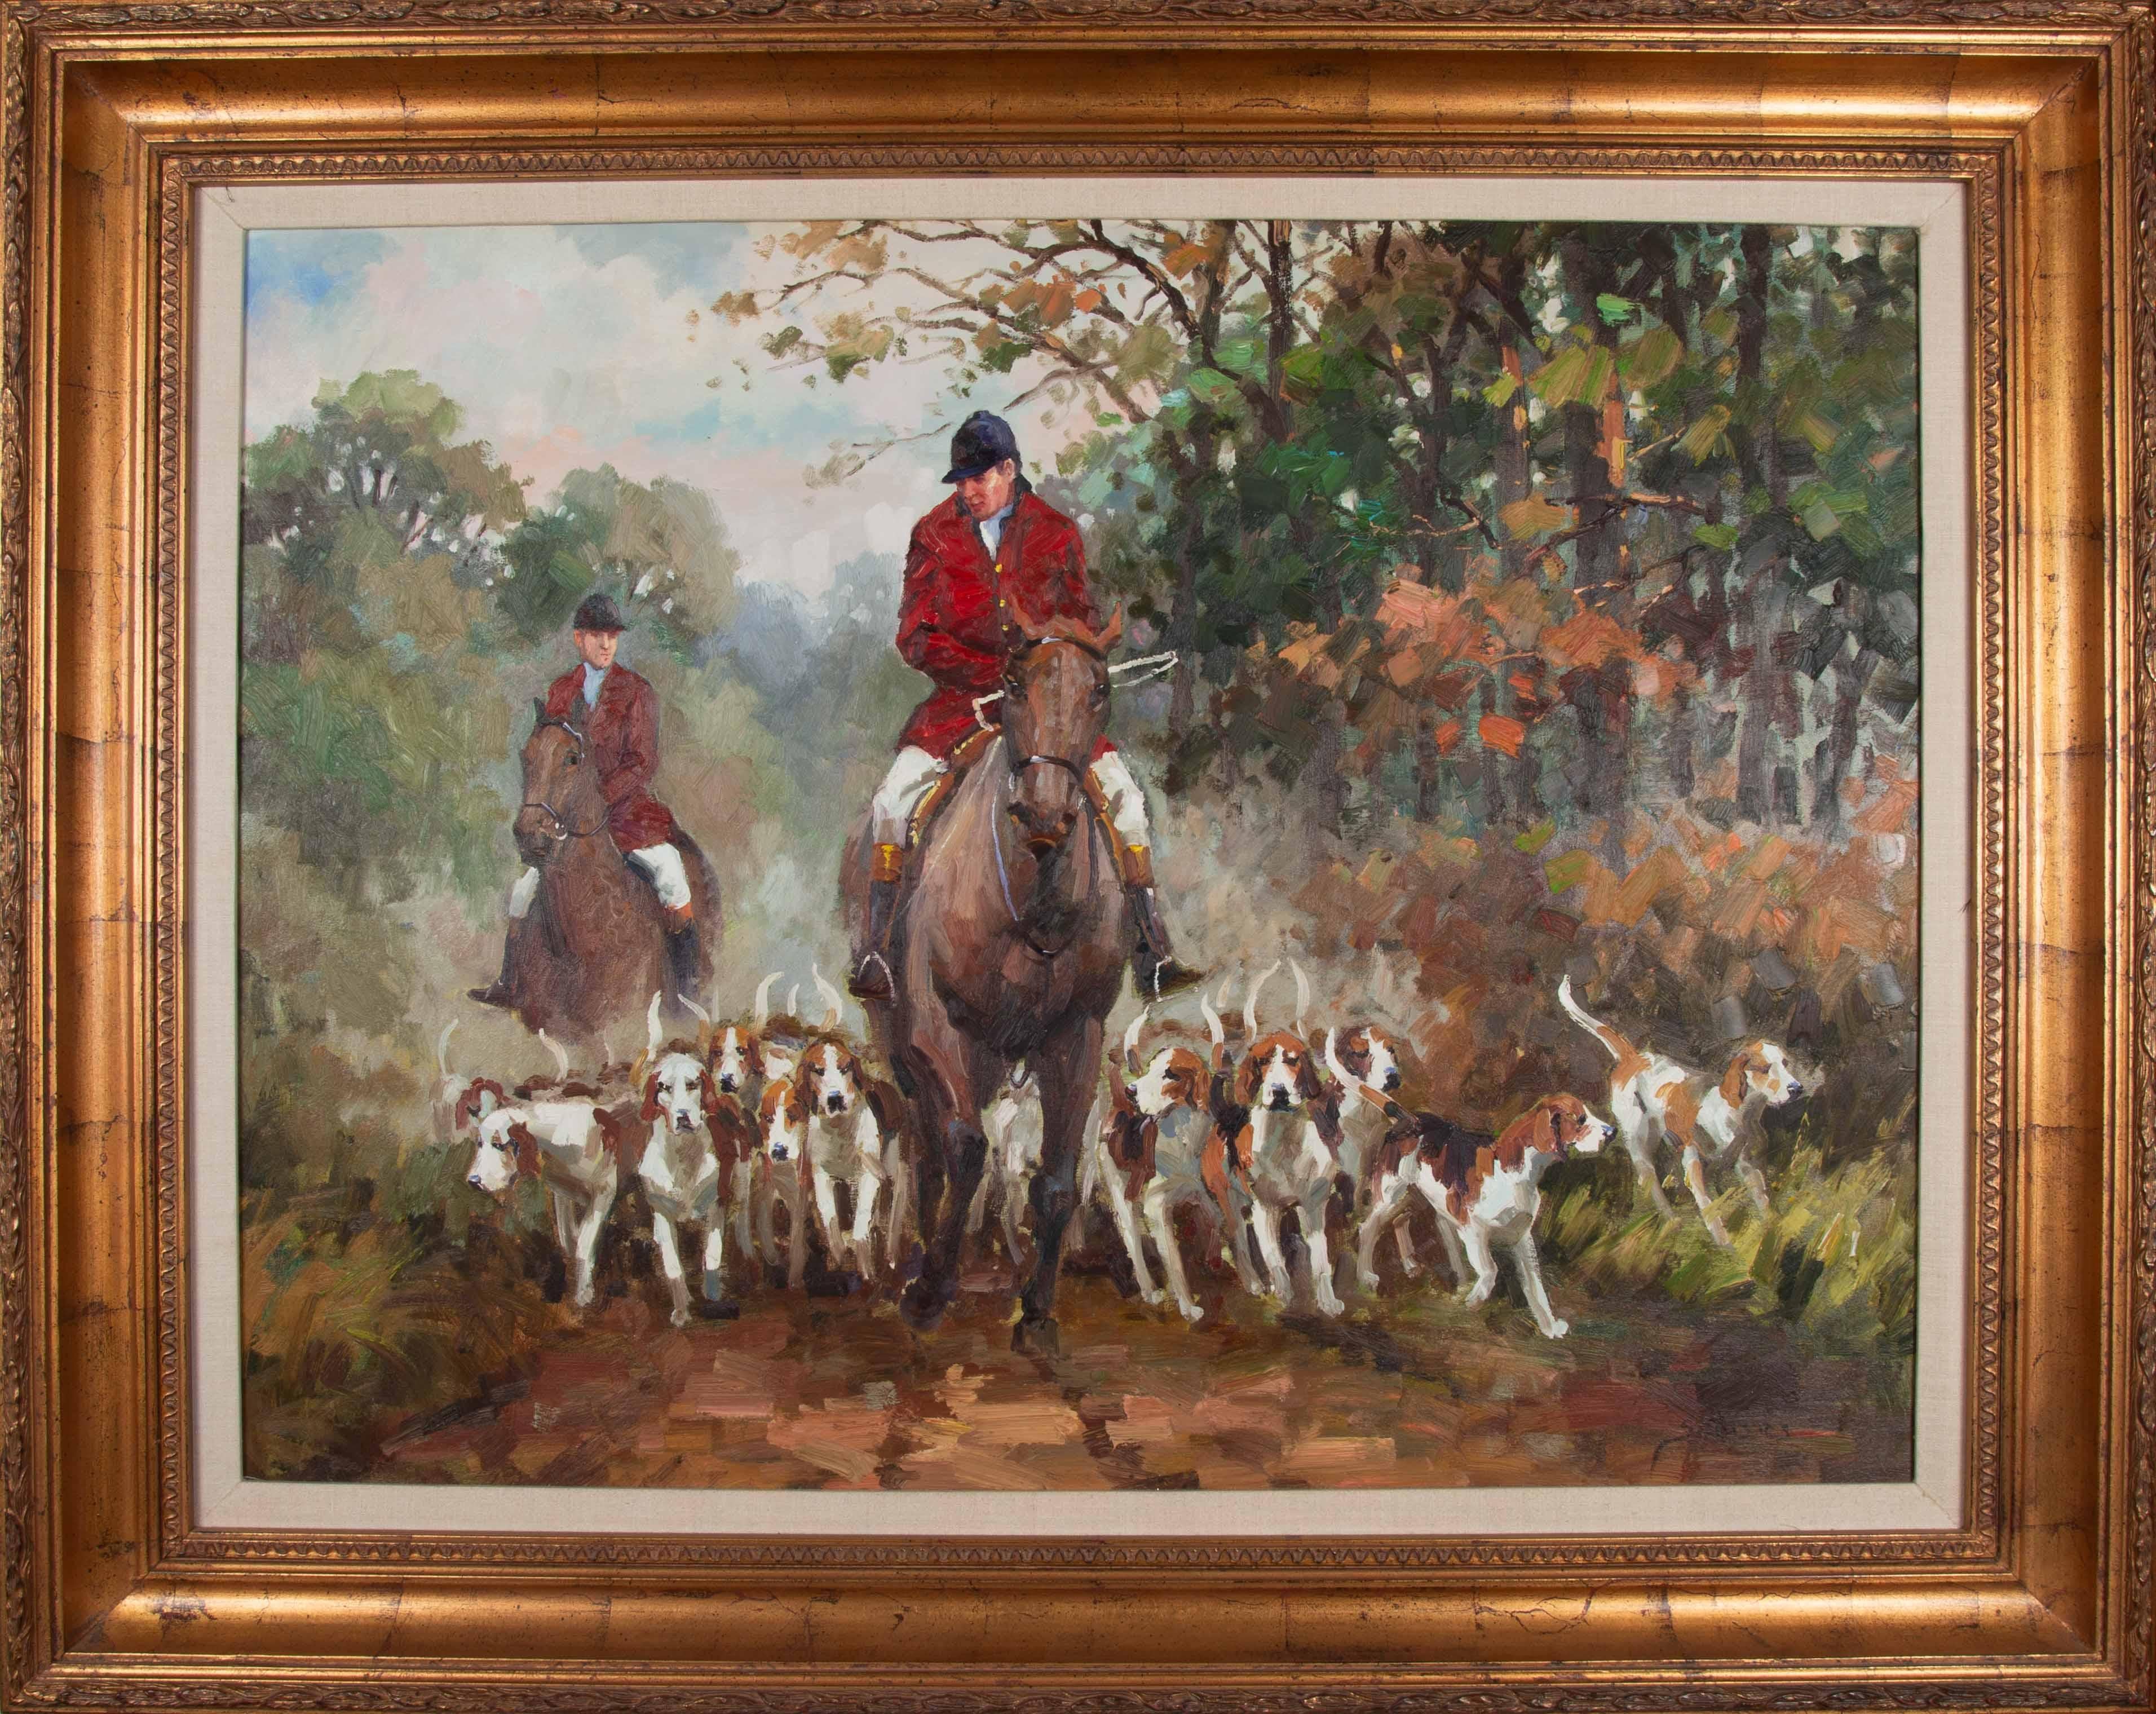 Hunting Party Sam Jusics Original 20th Century Sporting Art Painting 30" x 40", 40" x 50" Framed.
Provenance: Purchased from gallery in Beaufort, SC in 2002.
An excellent representation of 20th Century sporting art featuring two men on horseback